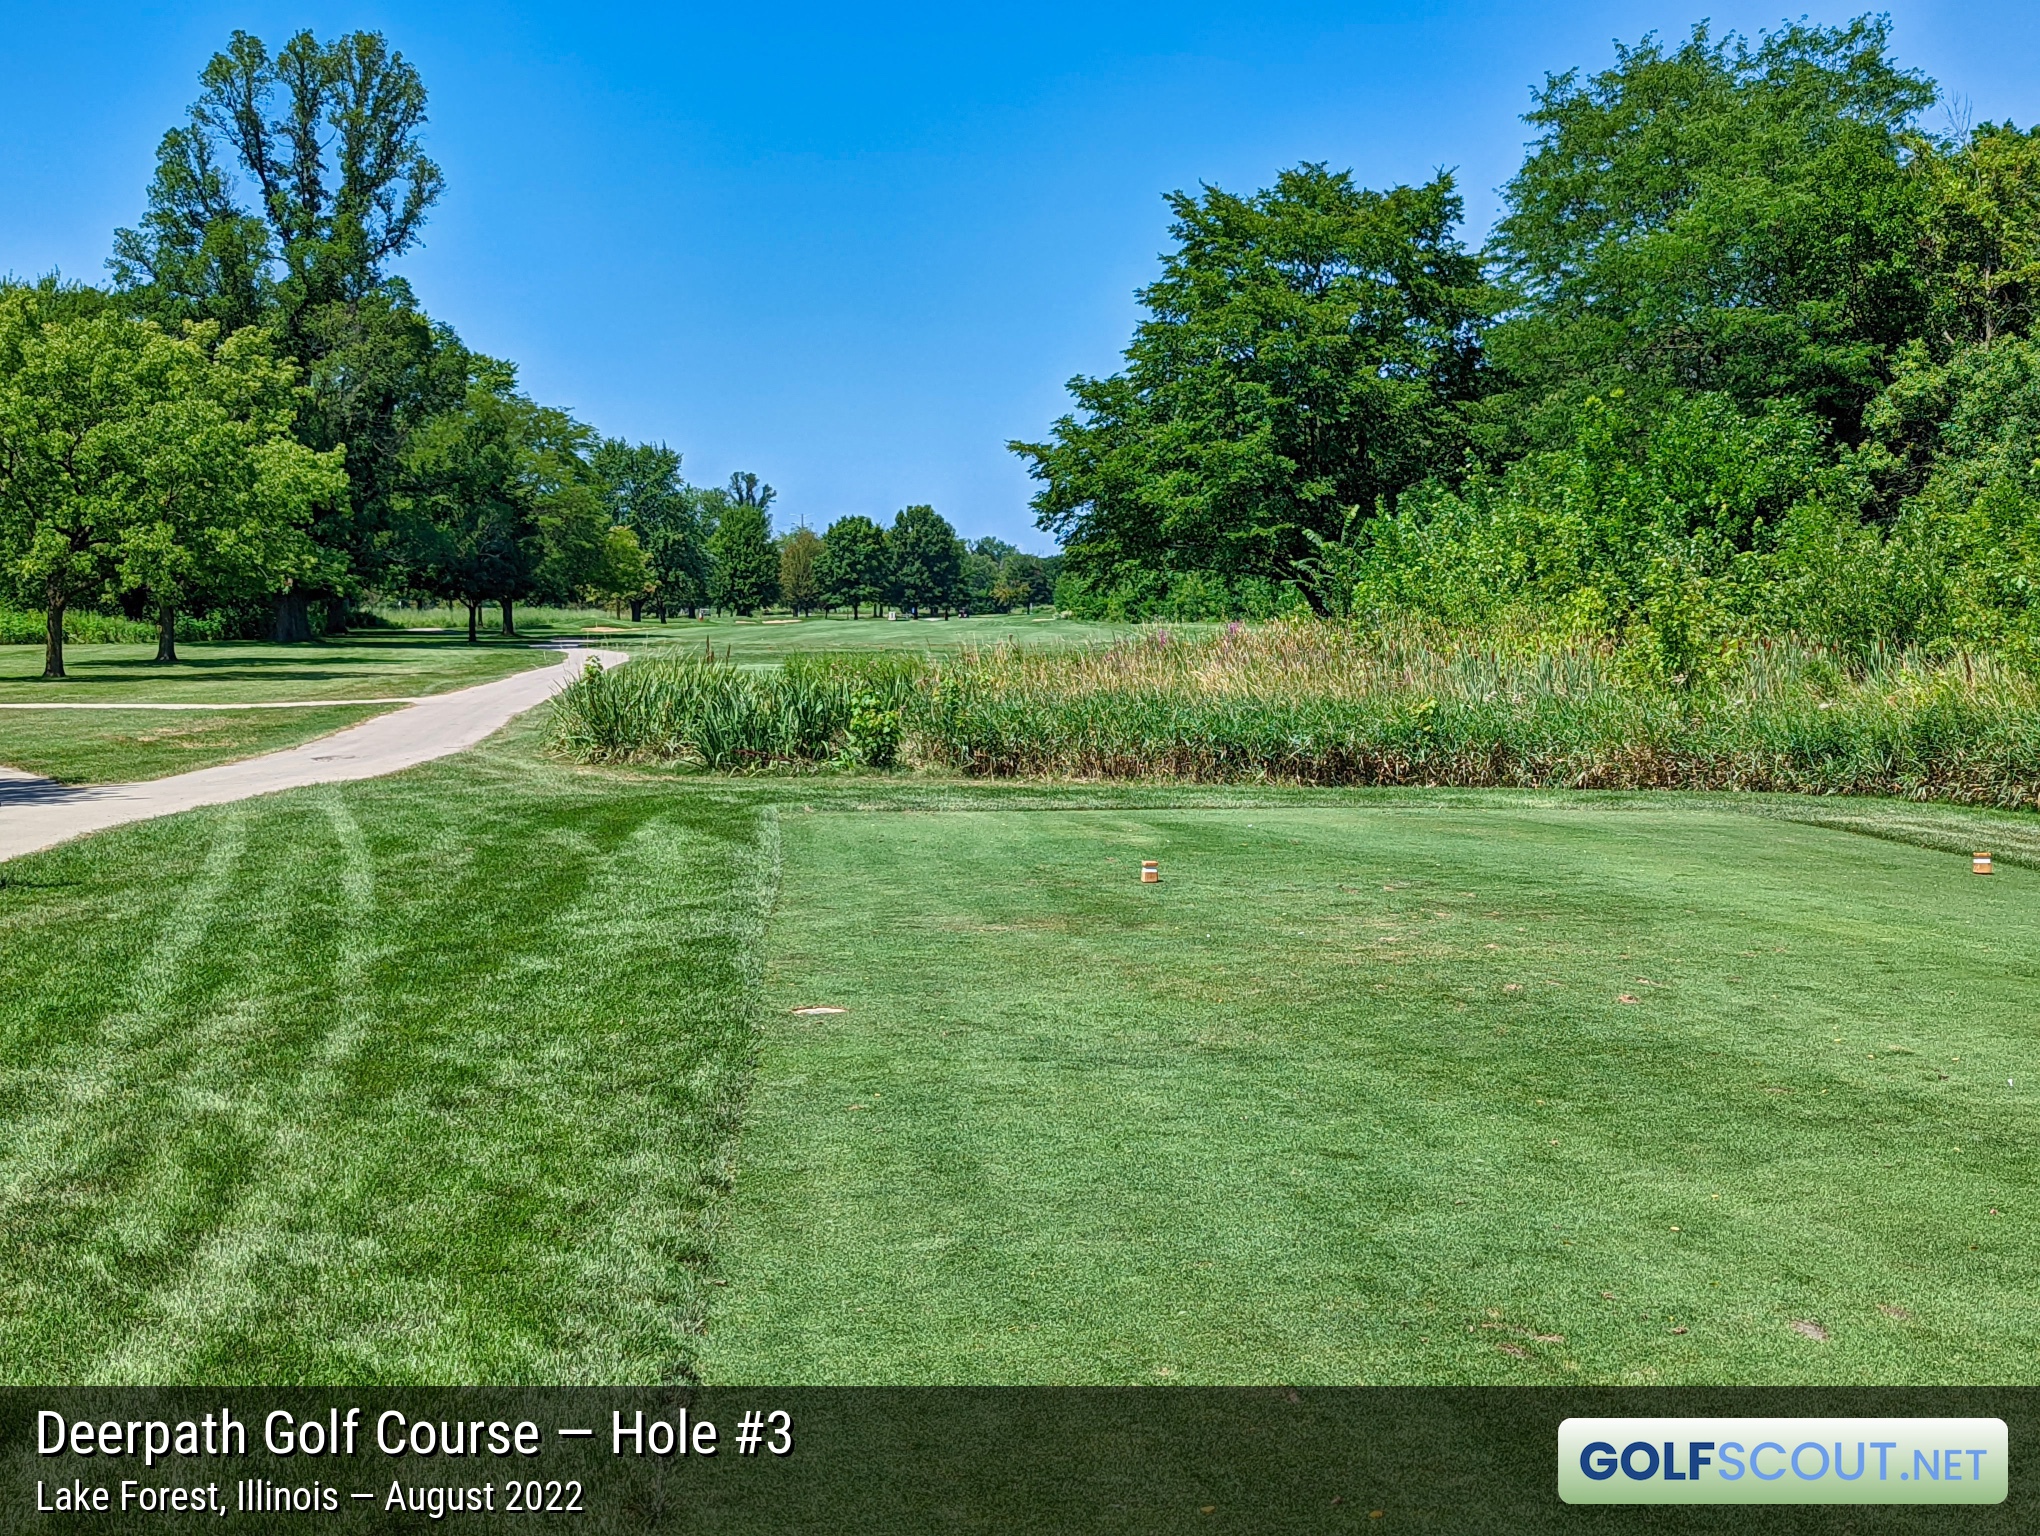 Photo of hole #3 at Deerpath Golf Course in Lake Forest, Illinois. 